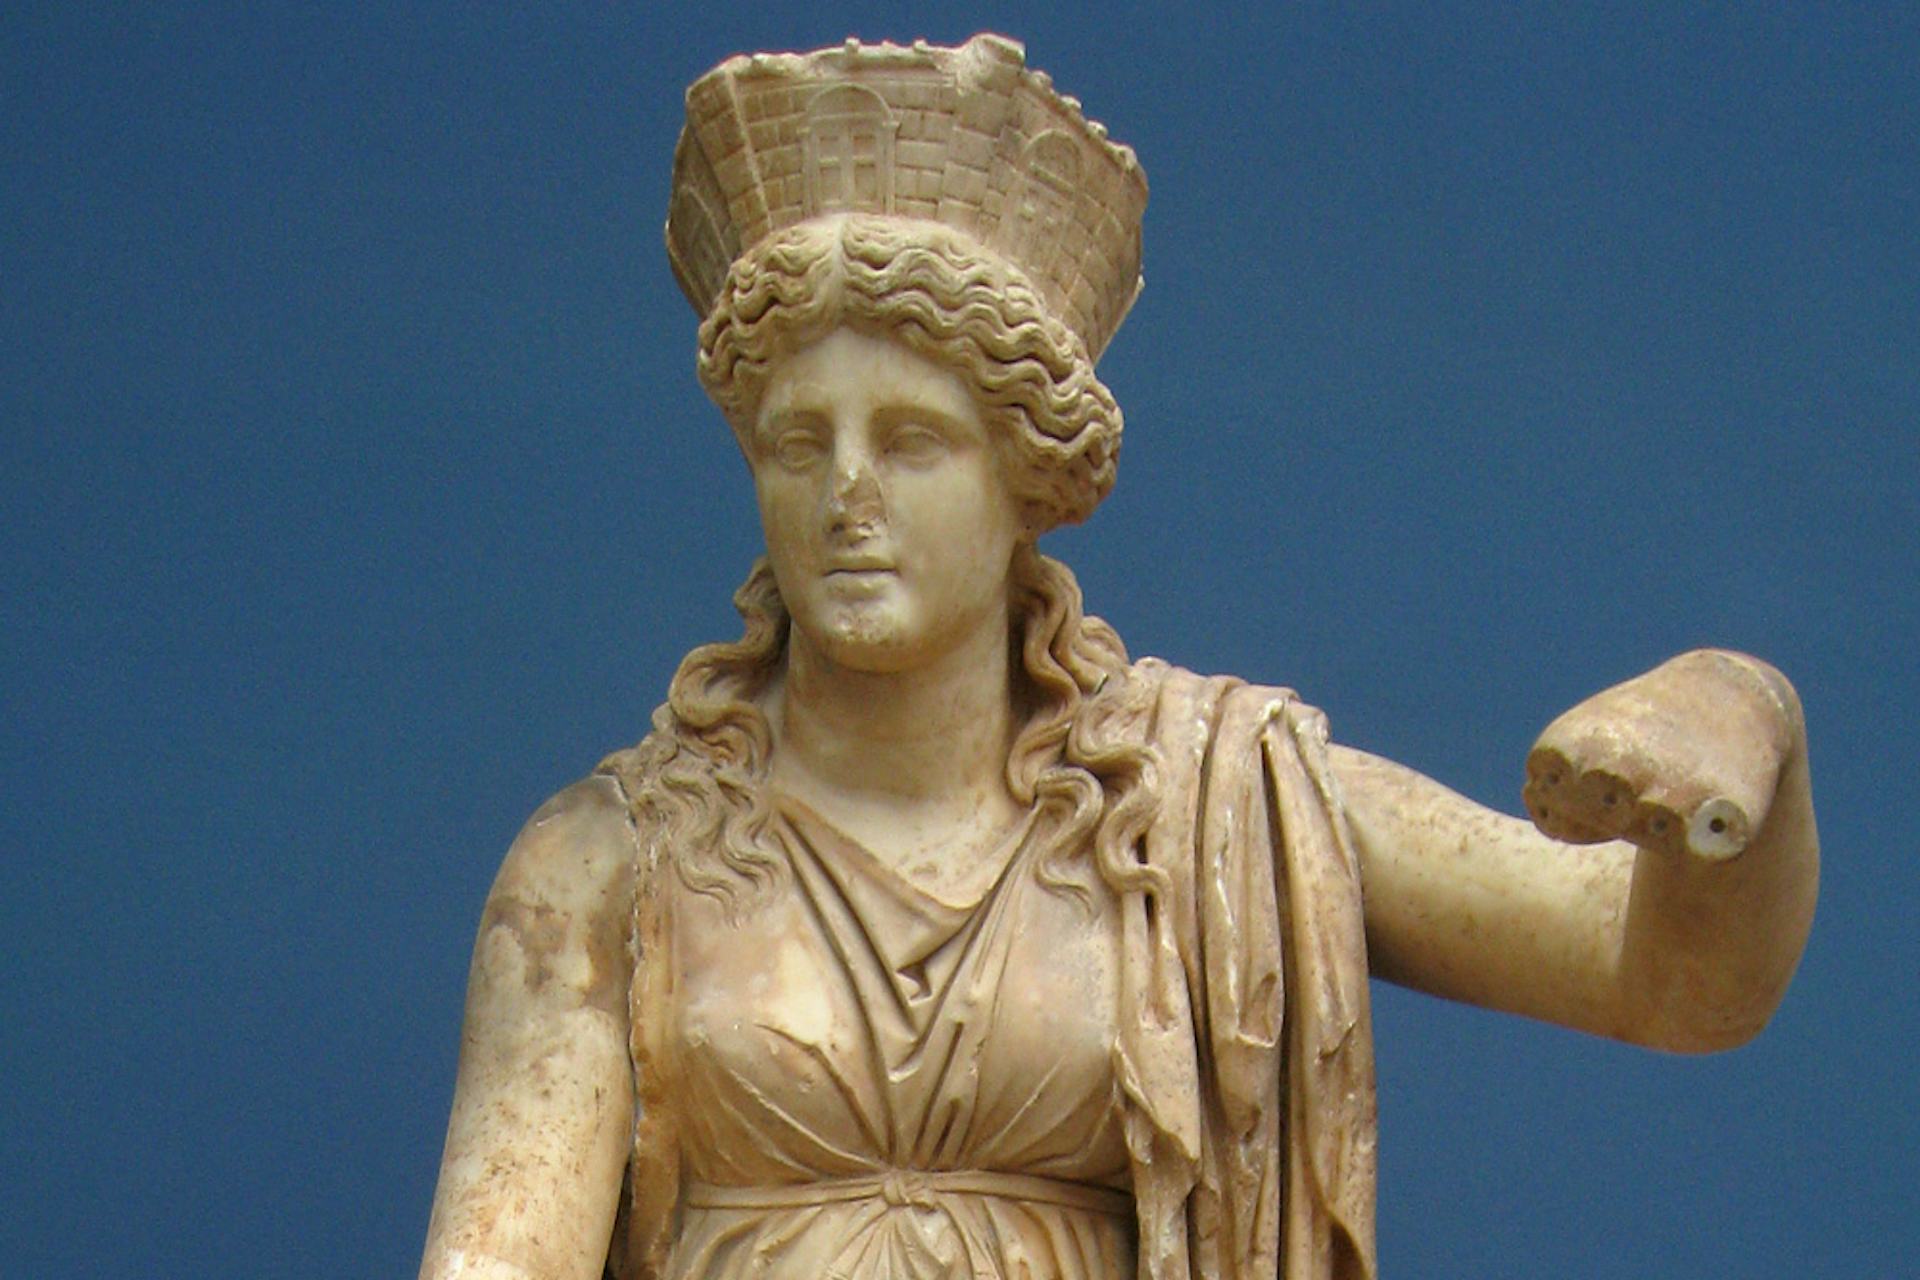 Marble statue of Cybele from Formia in Latium